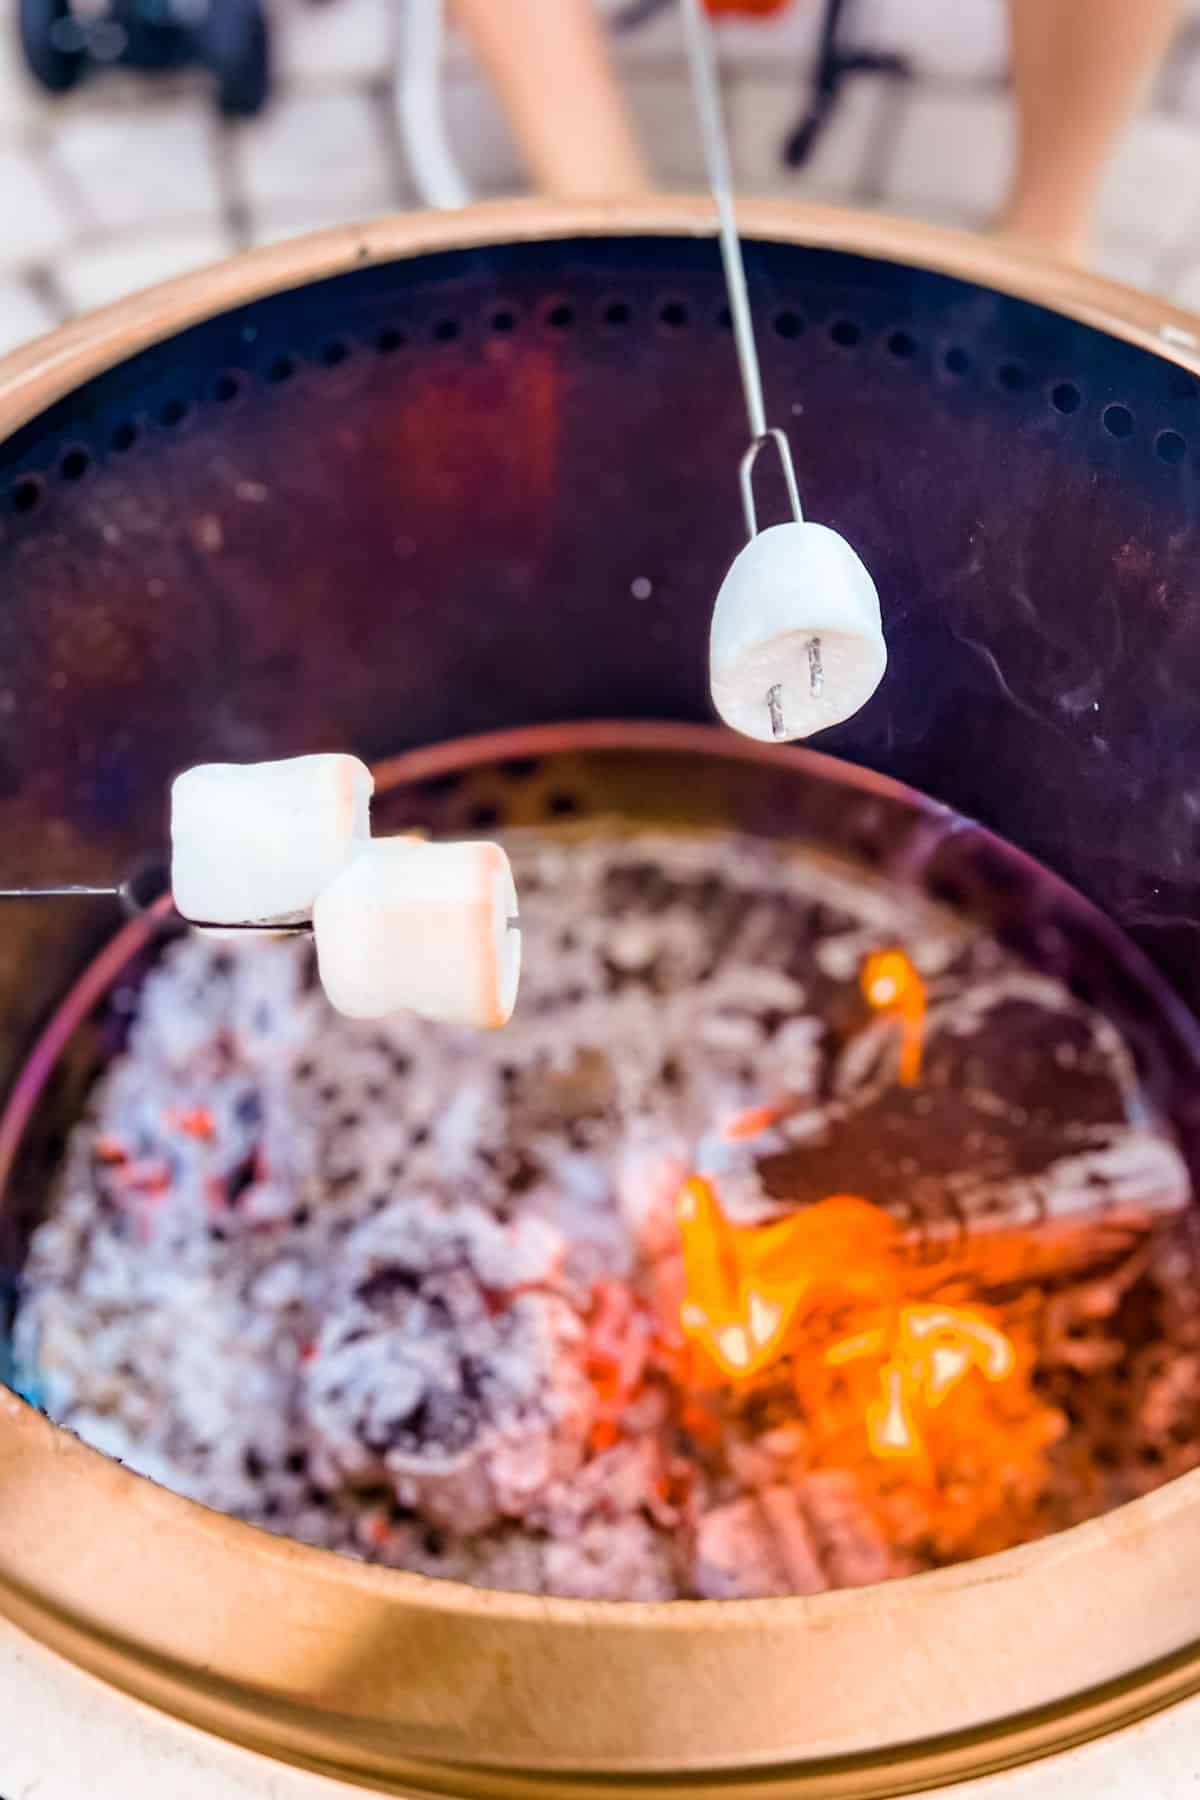 Three marshmallows being held on skewers and toasting over a fire pit.